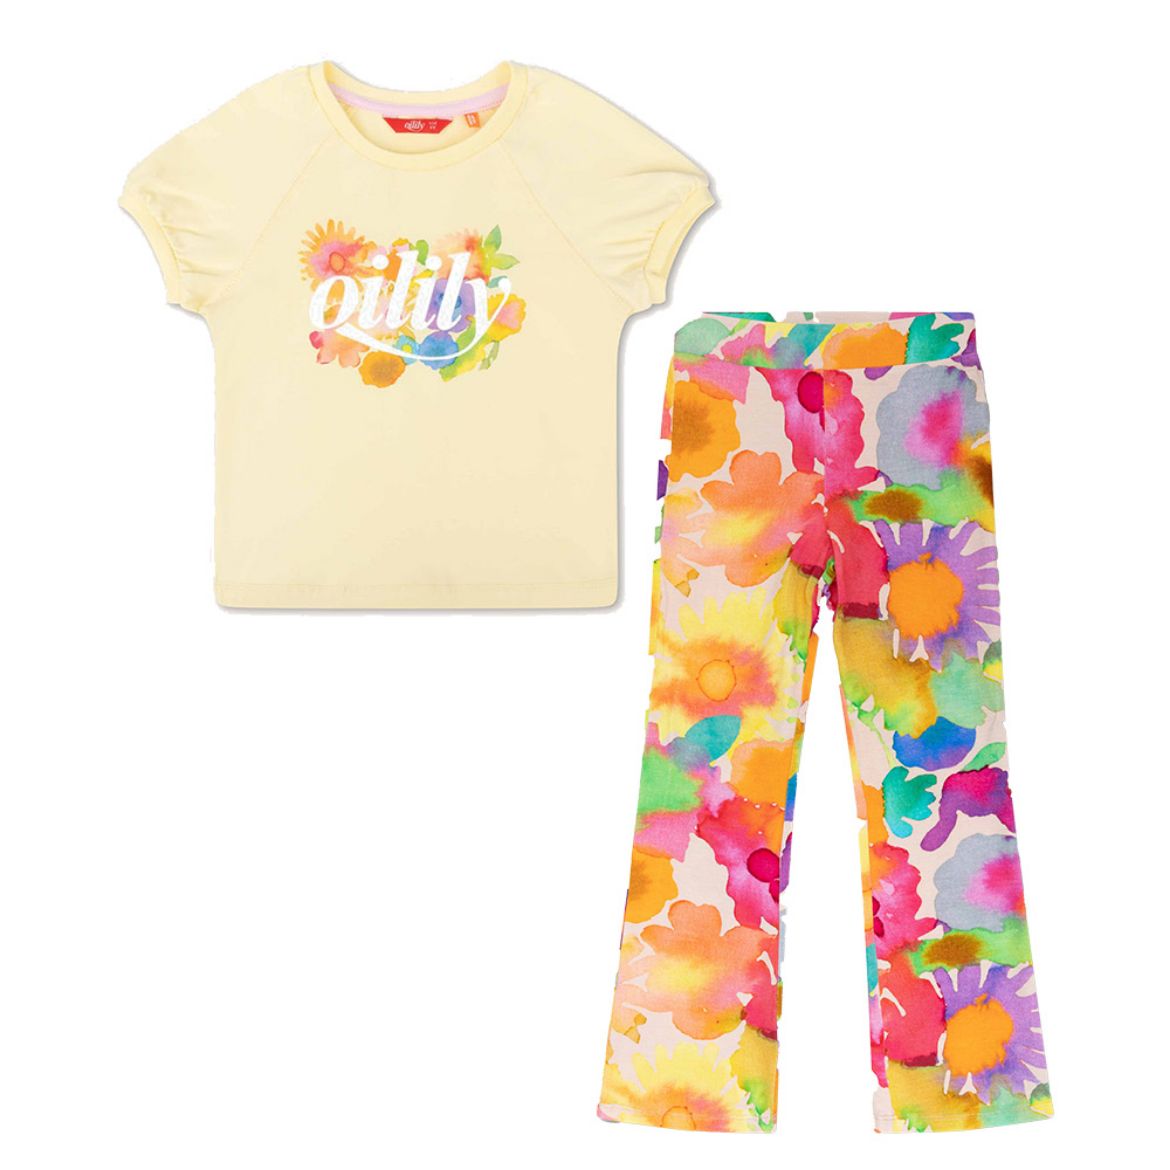 Picture of Oilily Girls Toria Top & Peace Flower Leggings Set